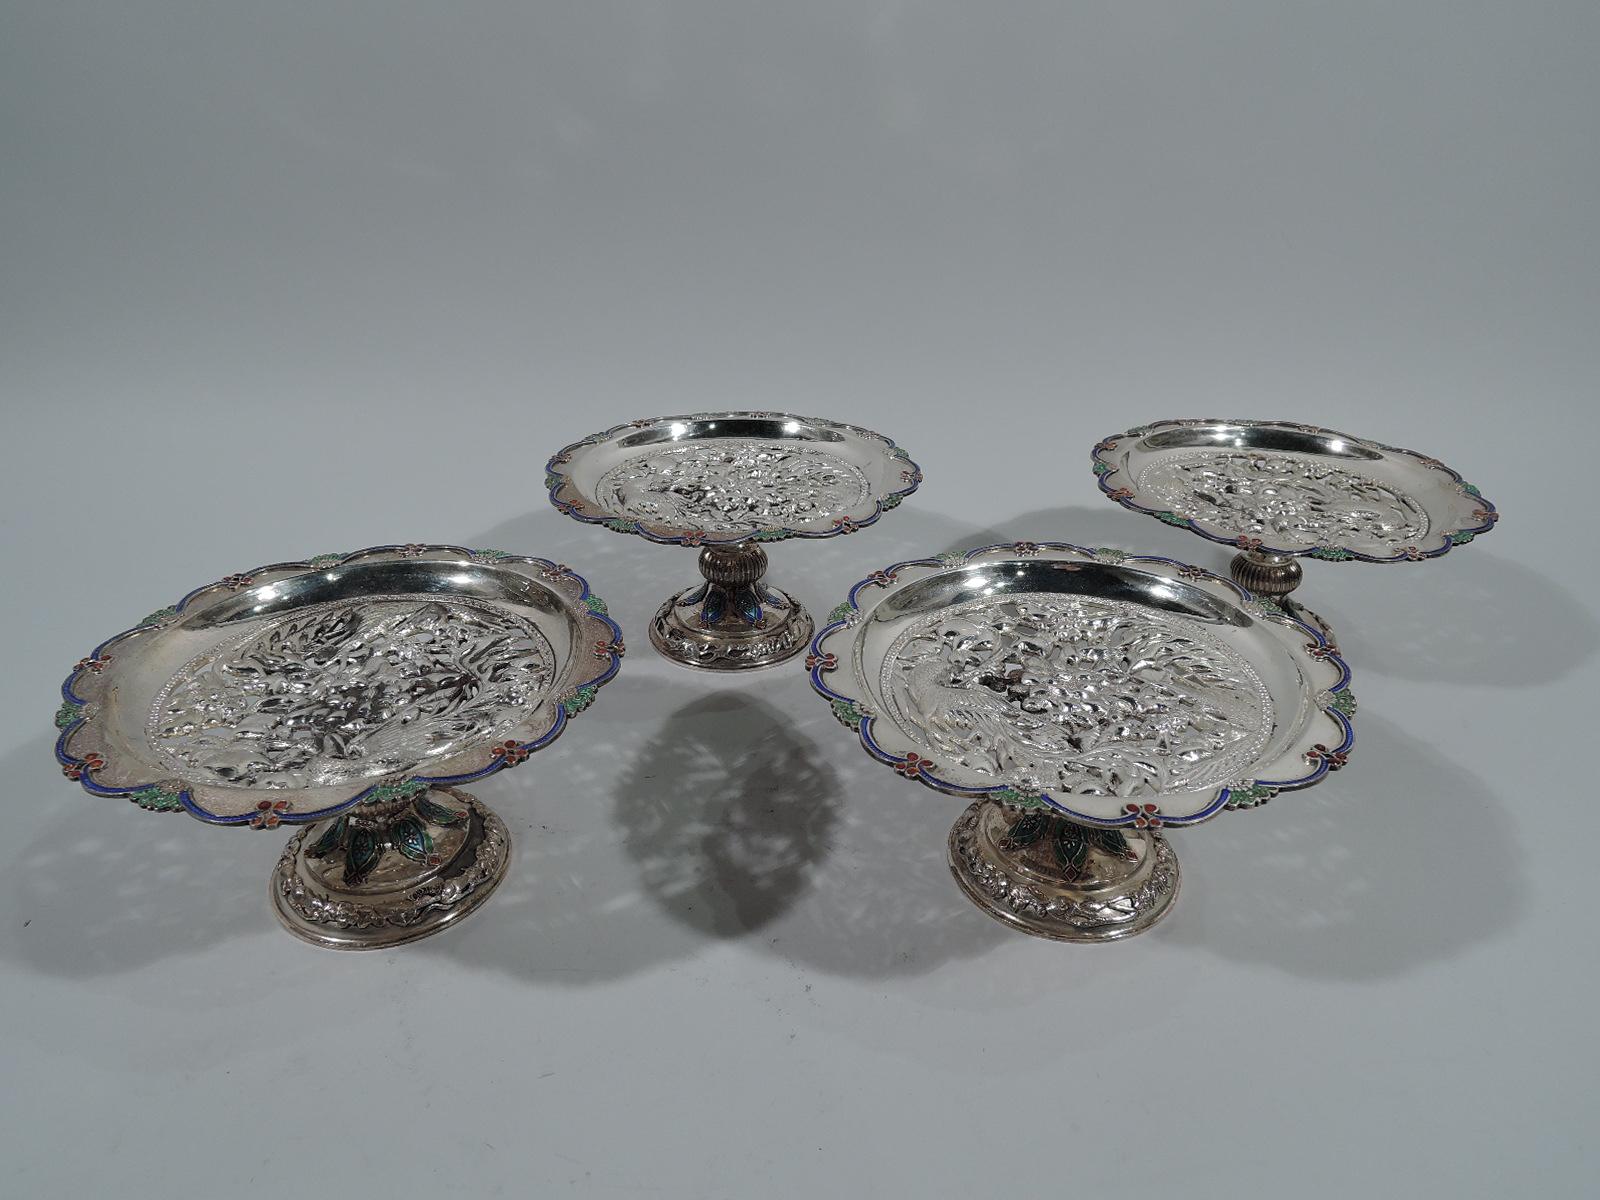 Set of 4 Southeast Asian export silver compotes, circa 1920. Each: Shallow bowl with pierced and chased birds and flowers. Enameled rim with raised scallops interspersed with berries and leaves. Support has ribbed knop. Foot raised with applied